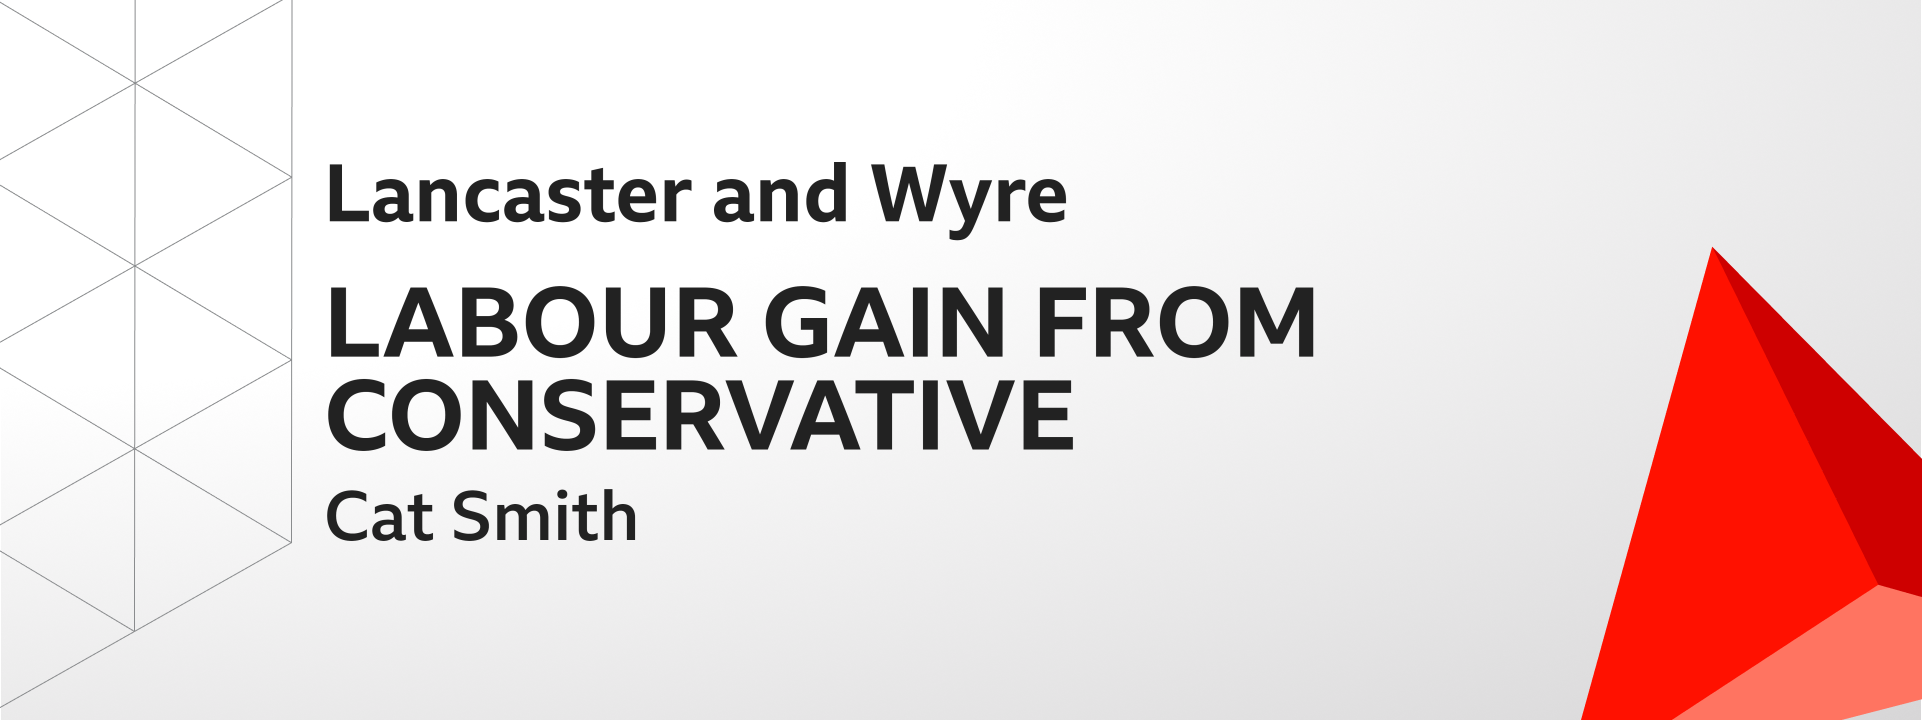 Graphic showing Labour gains Lancaster and Wyre from the Conservatives. The winning candidate was Cat Smith.